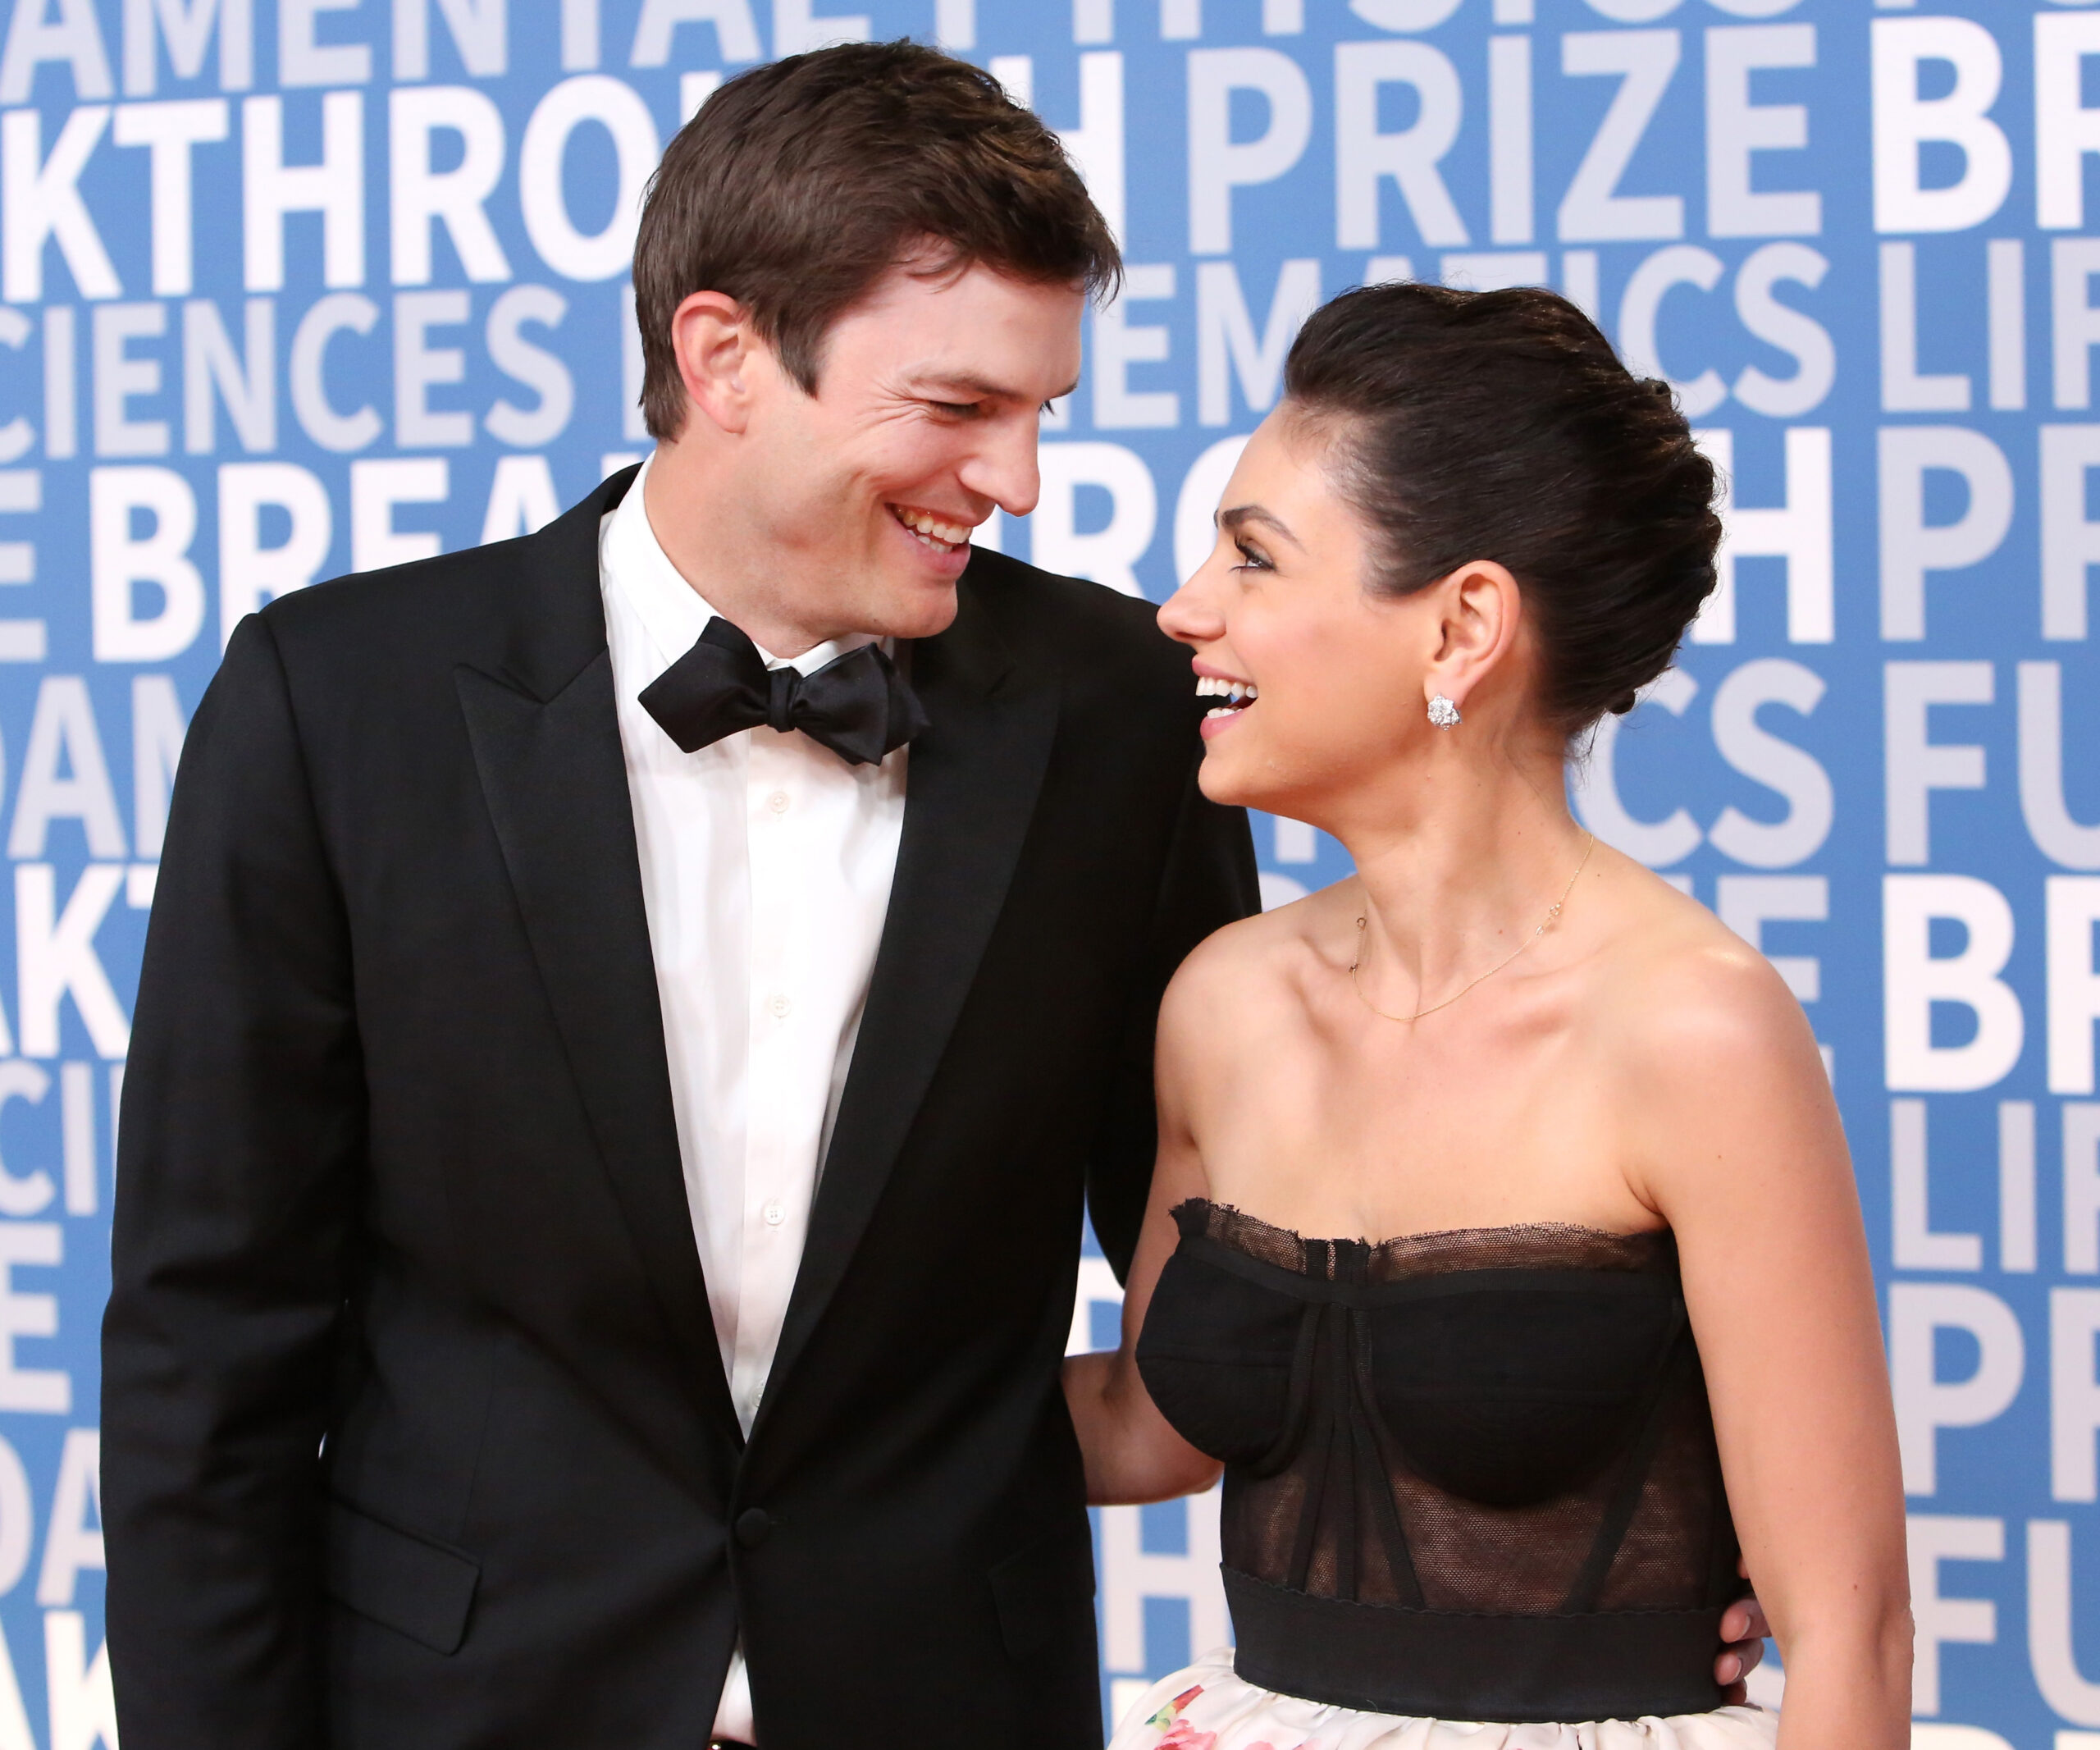 Mila Kunis gives a candid interview about her husband Ashton Kutcher and his ex-wife Demi Moore